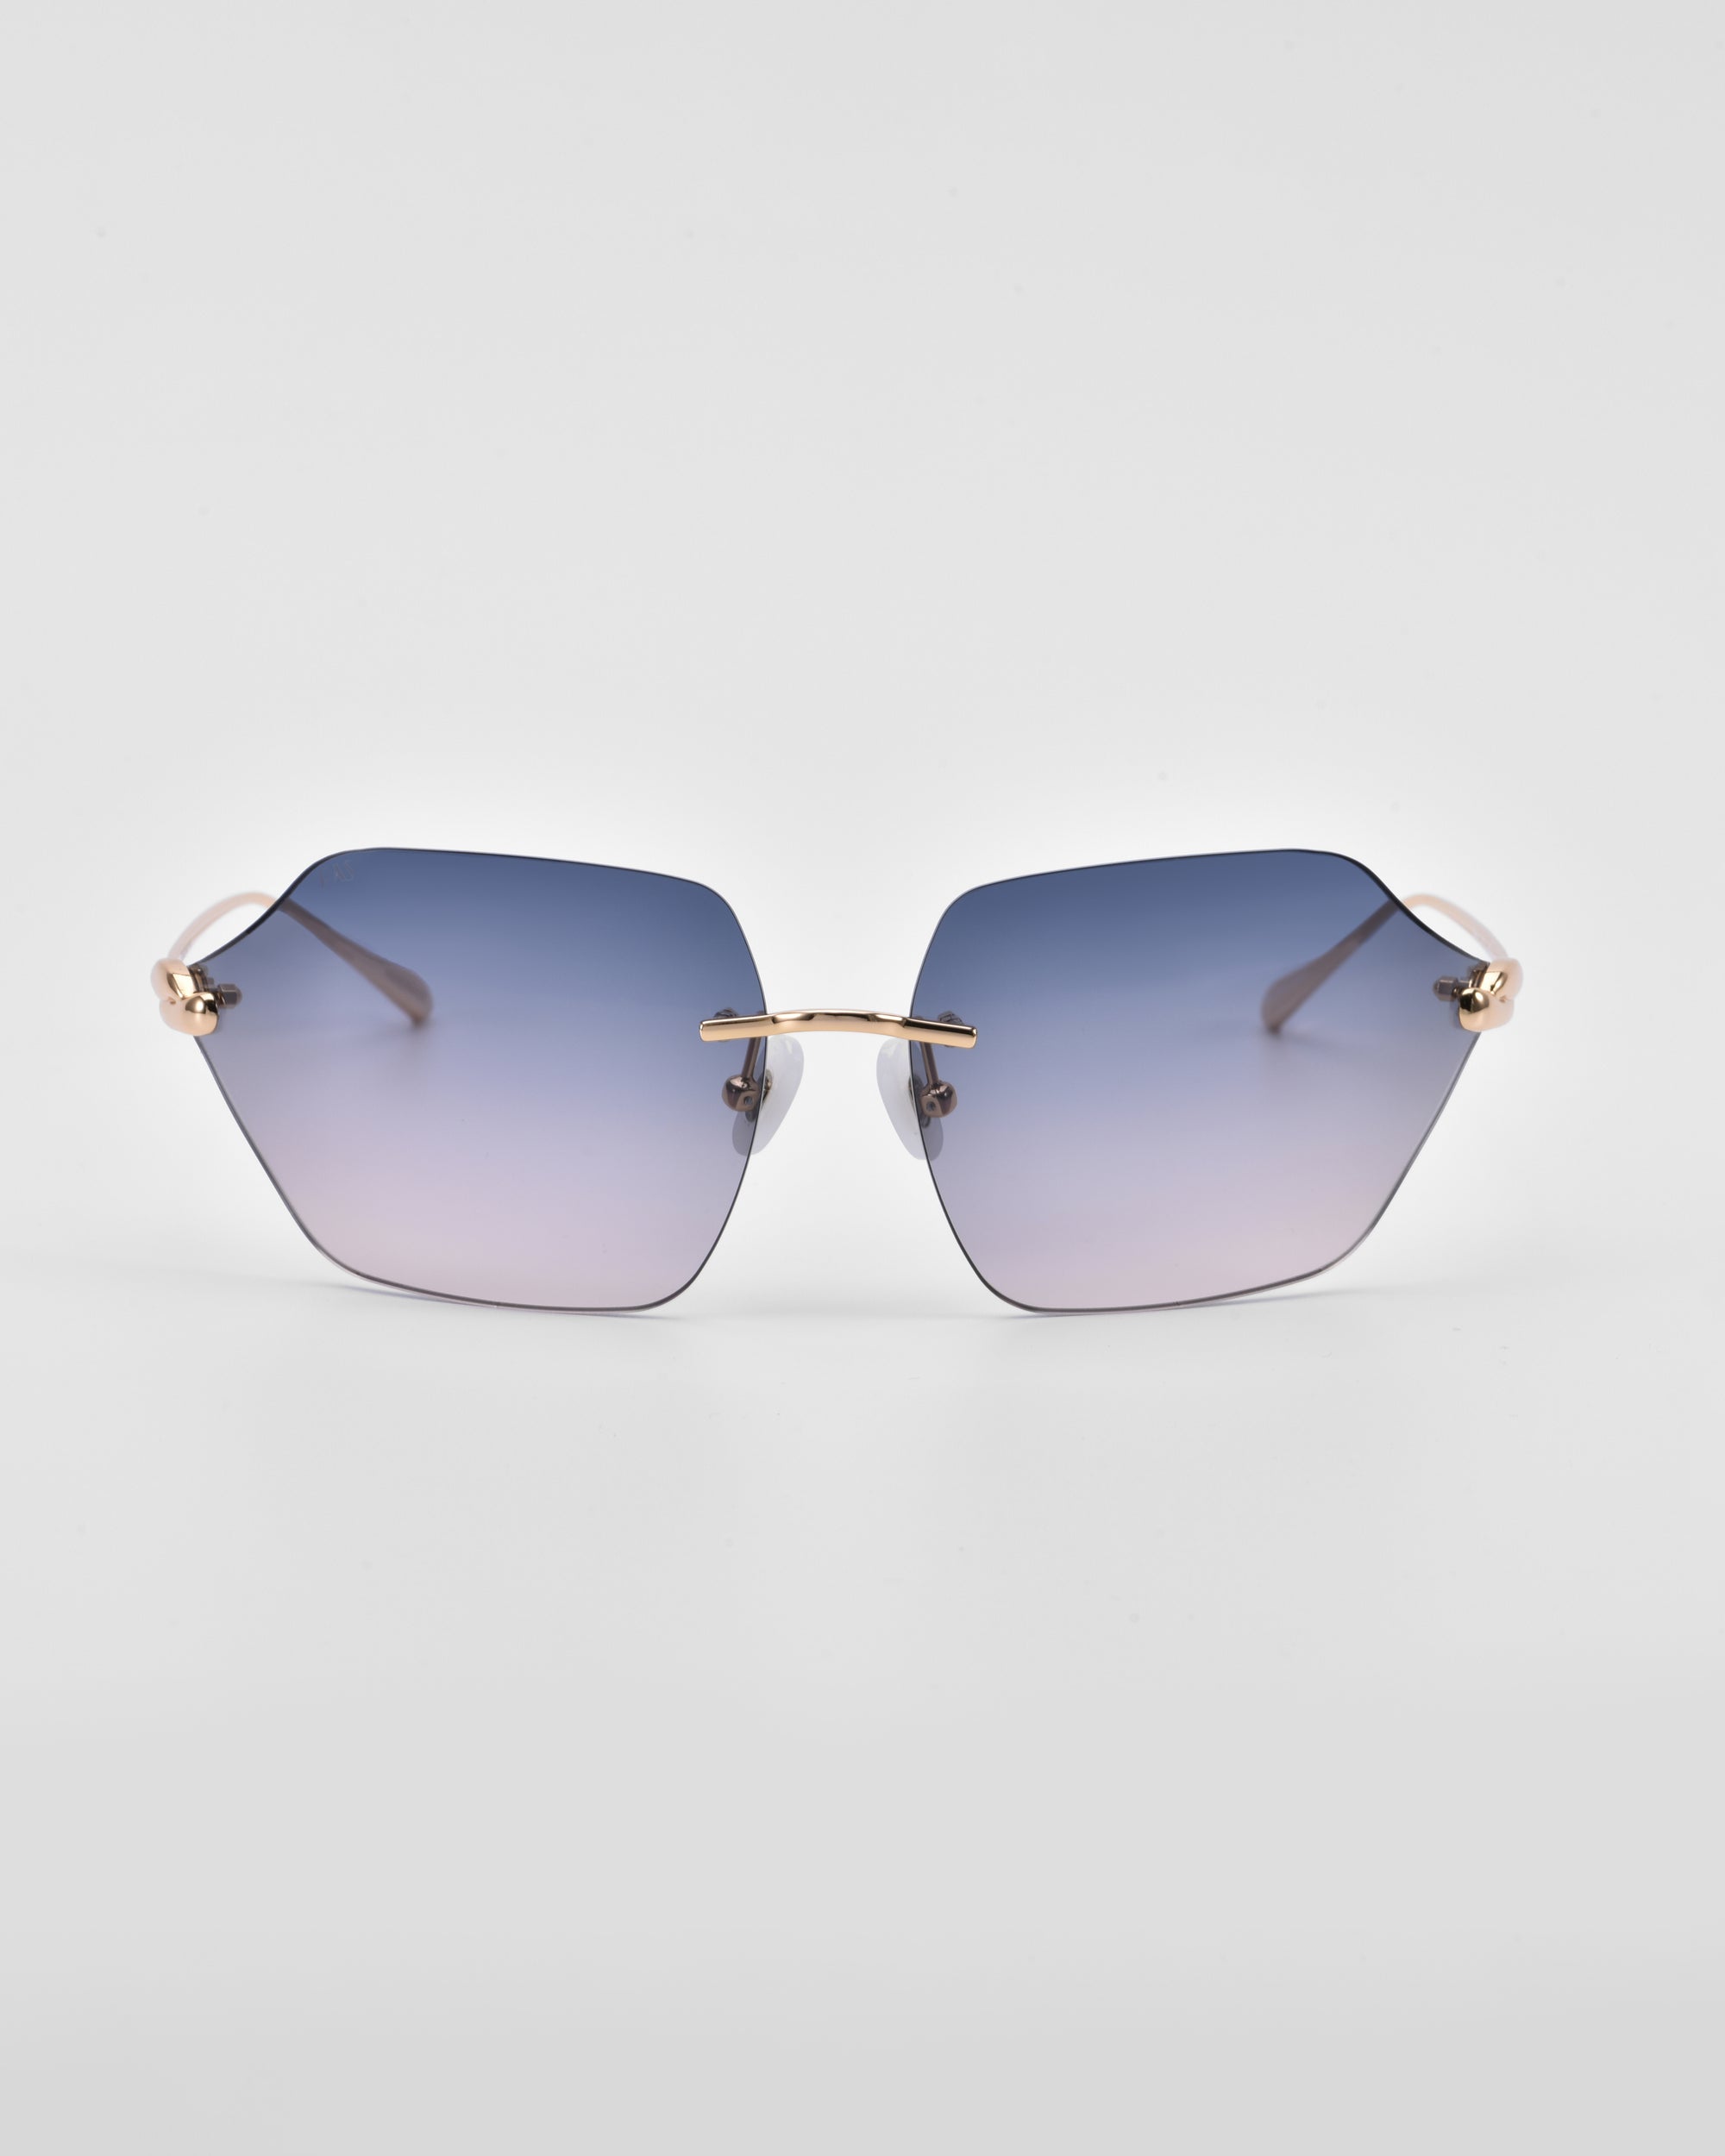 A pair of stylish For Art&#39;s Sake® Serpent II sunglasses with gradient purple lenses and gold detailing. The lenses have a unique pentagonal shape, enhanced by the 18-karat gold plating on the thin temples and nose bridge. The background is plain white.